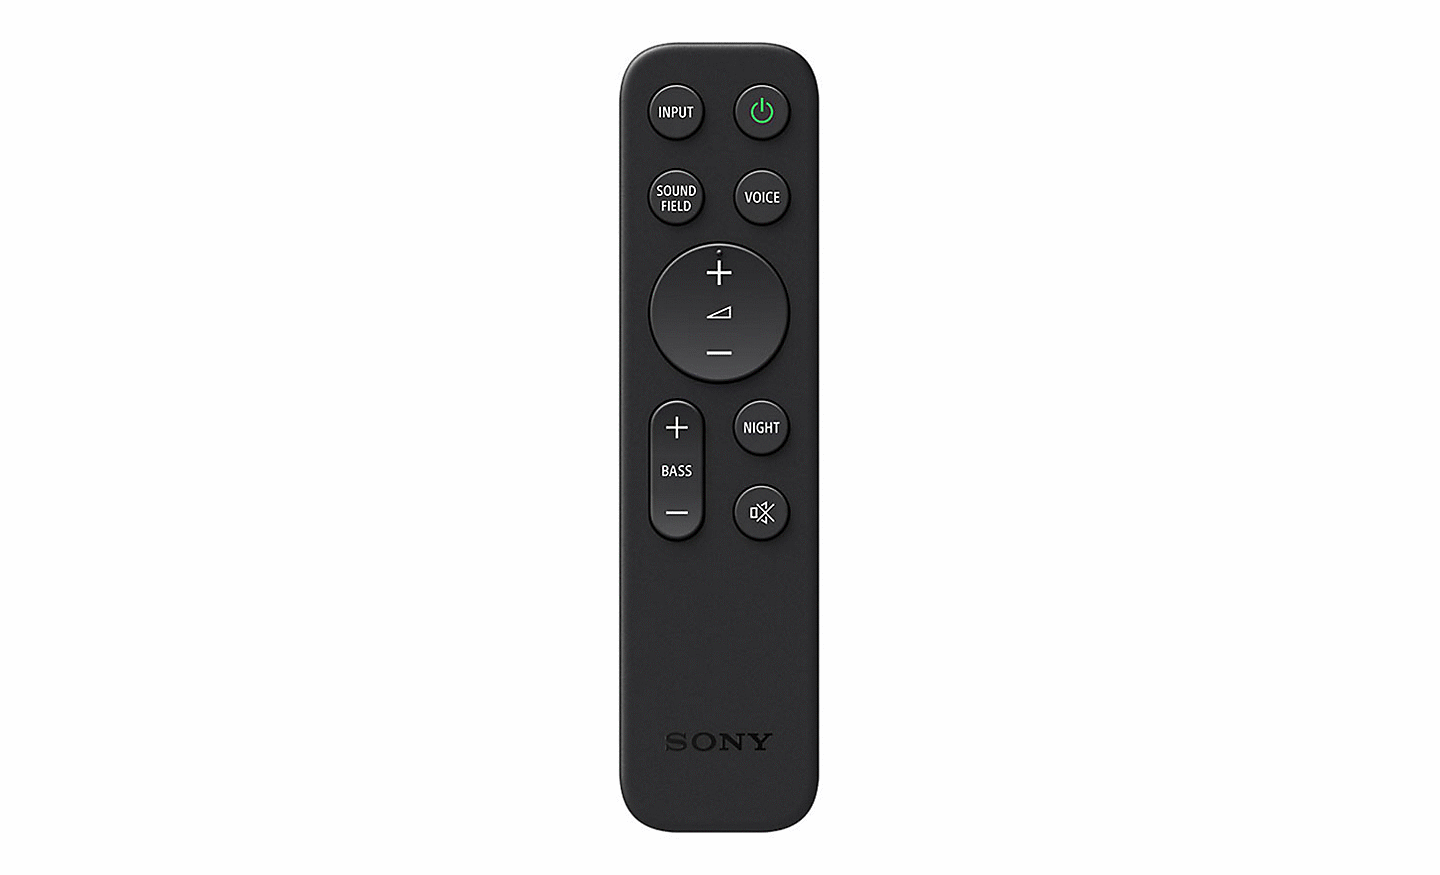 Image of the HT-S2000 remote on a white background